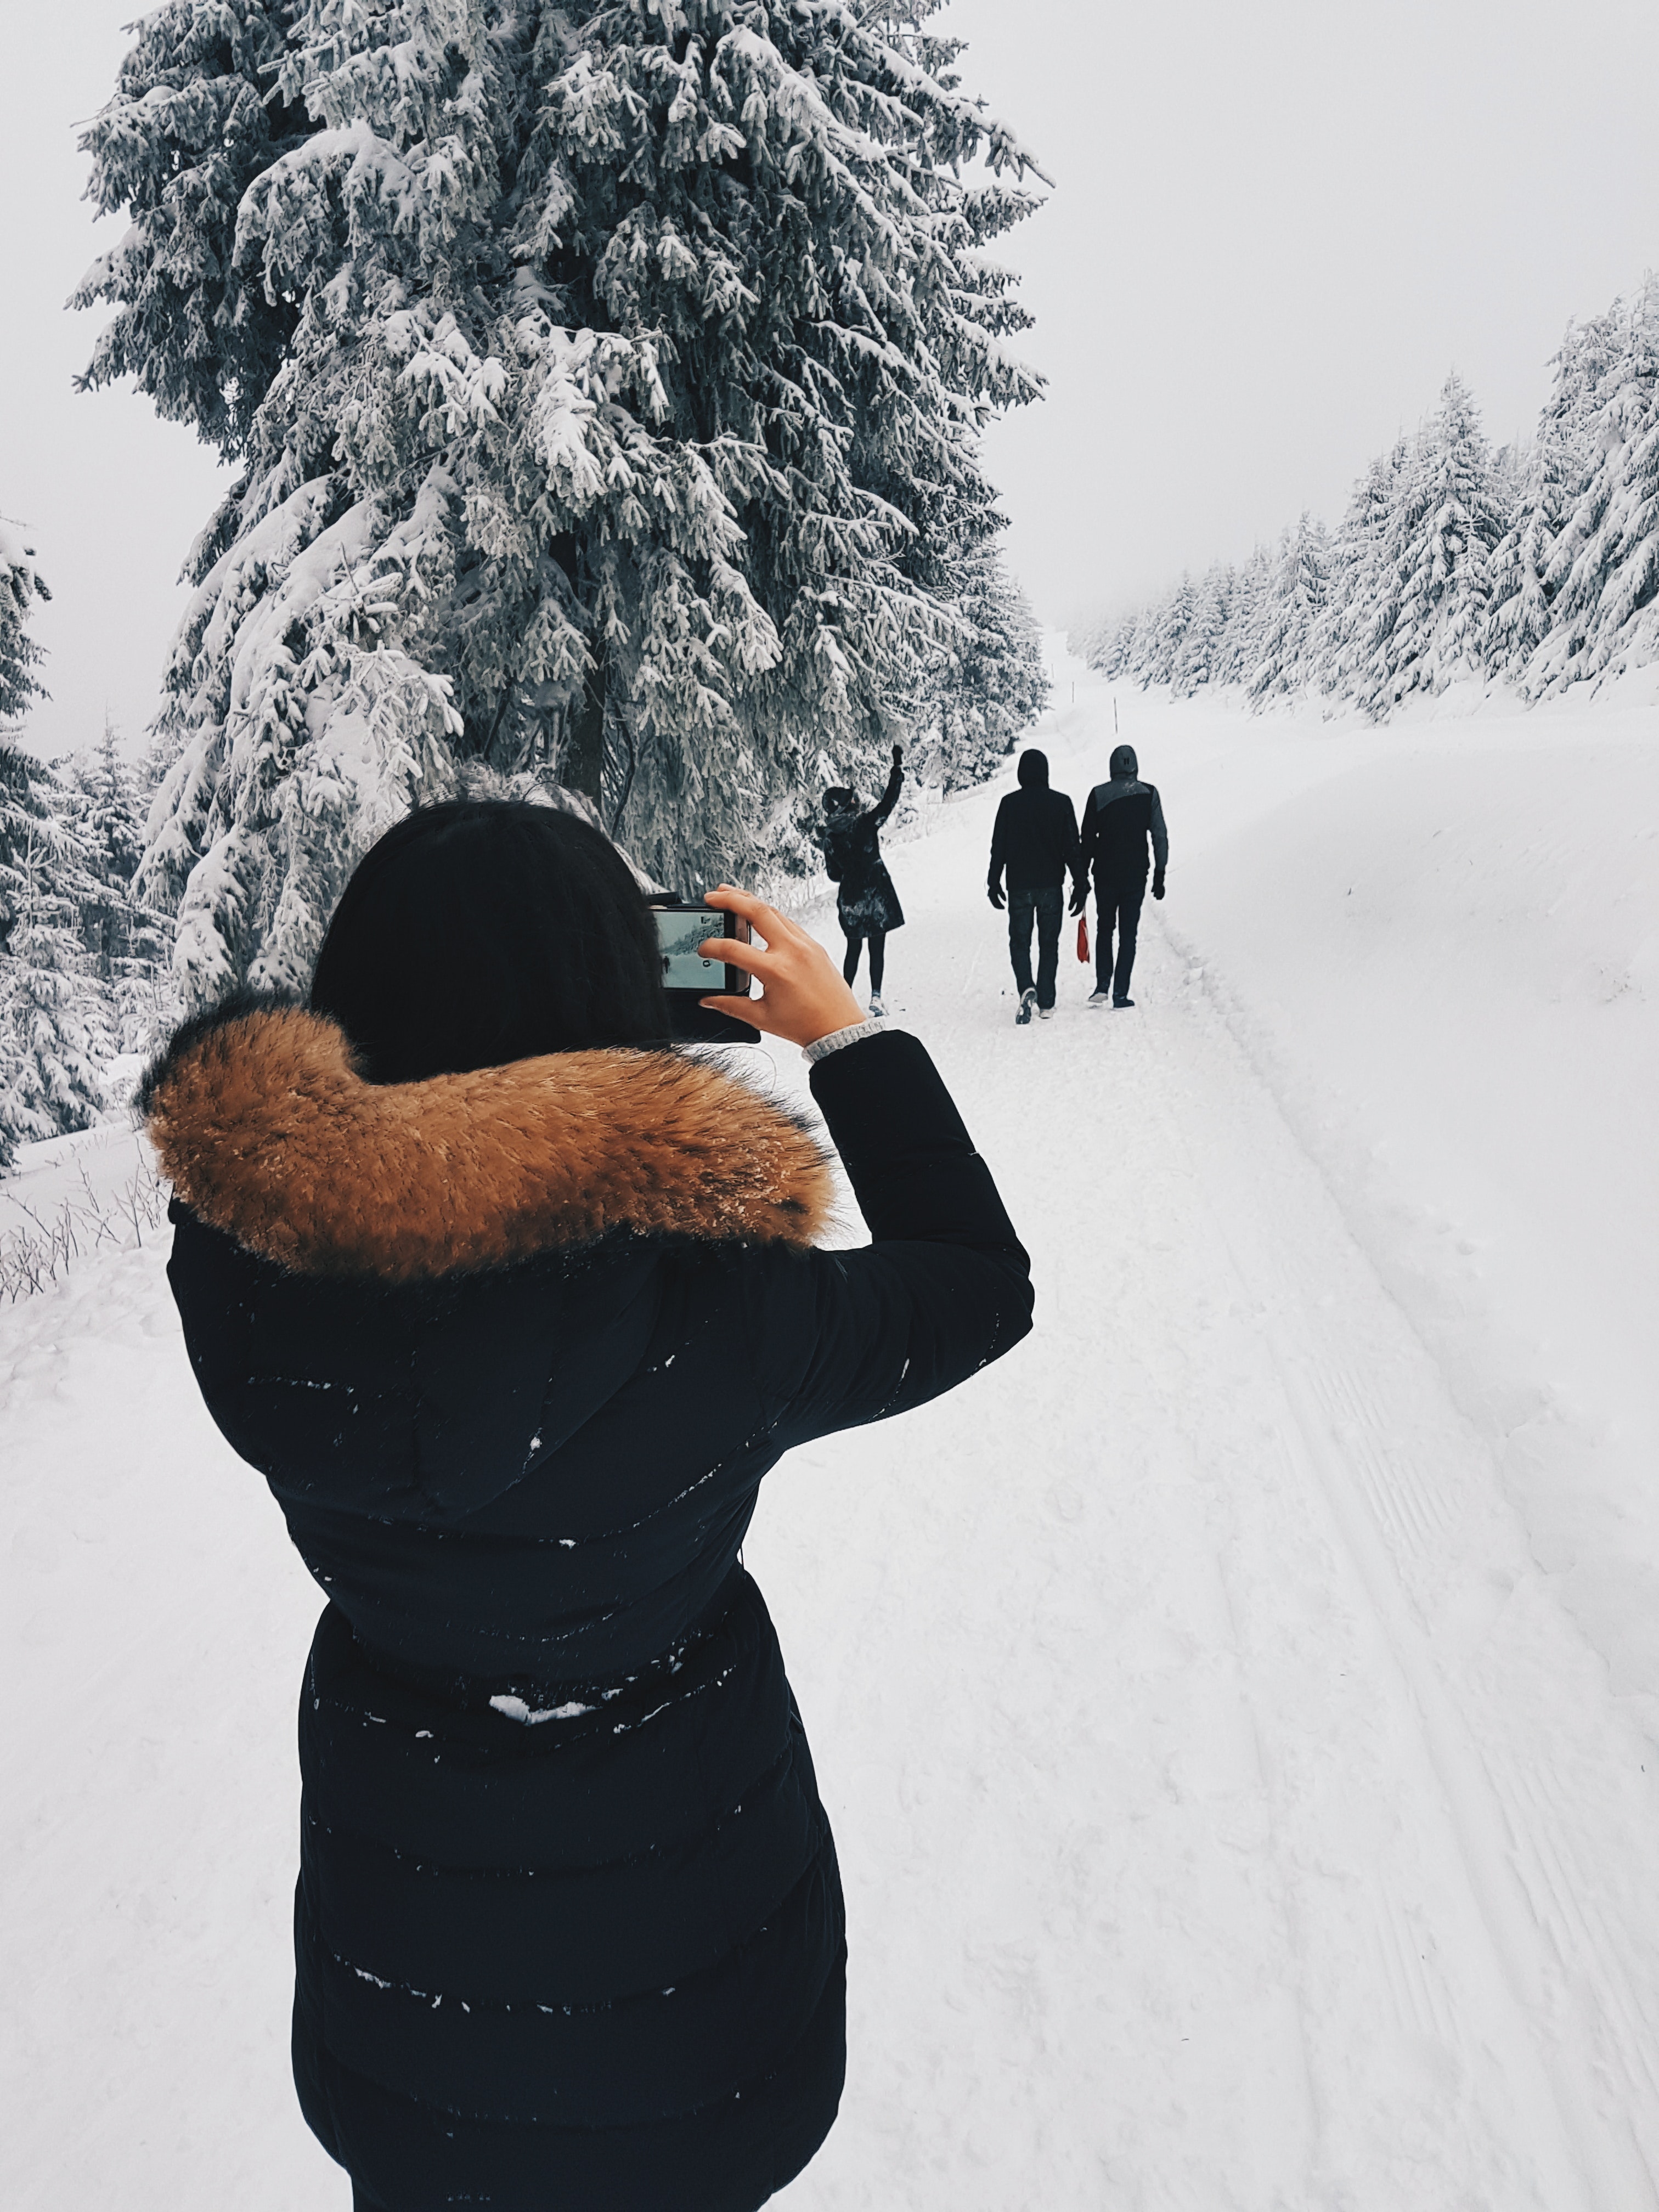 Woman in black coat taking a picture of three person in front of her while walking through snow field photo